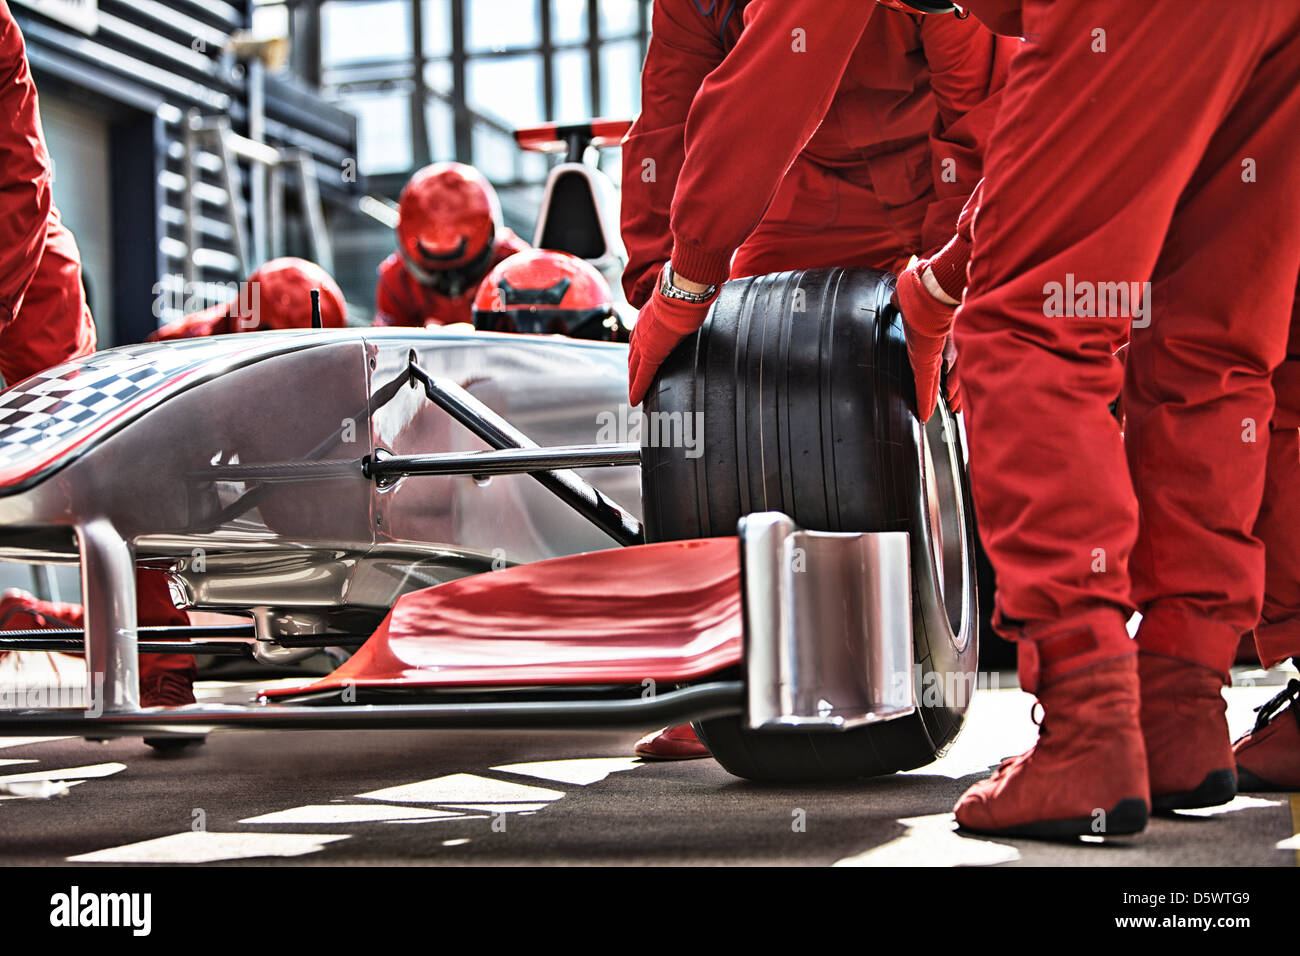 Racing team working at pit stop Banque D'Images